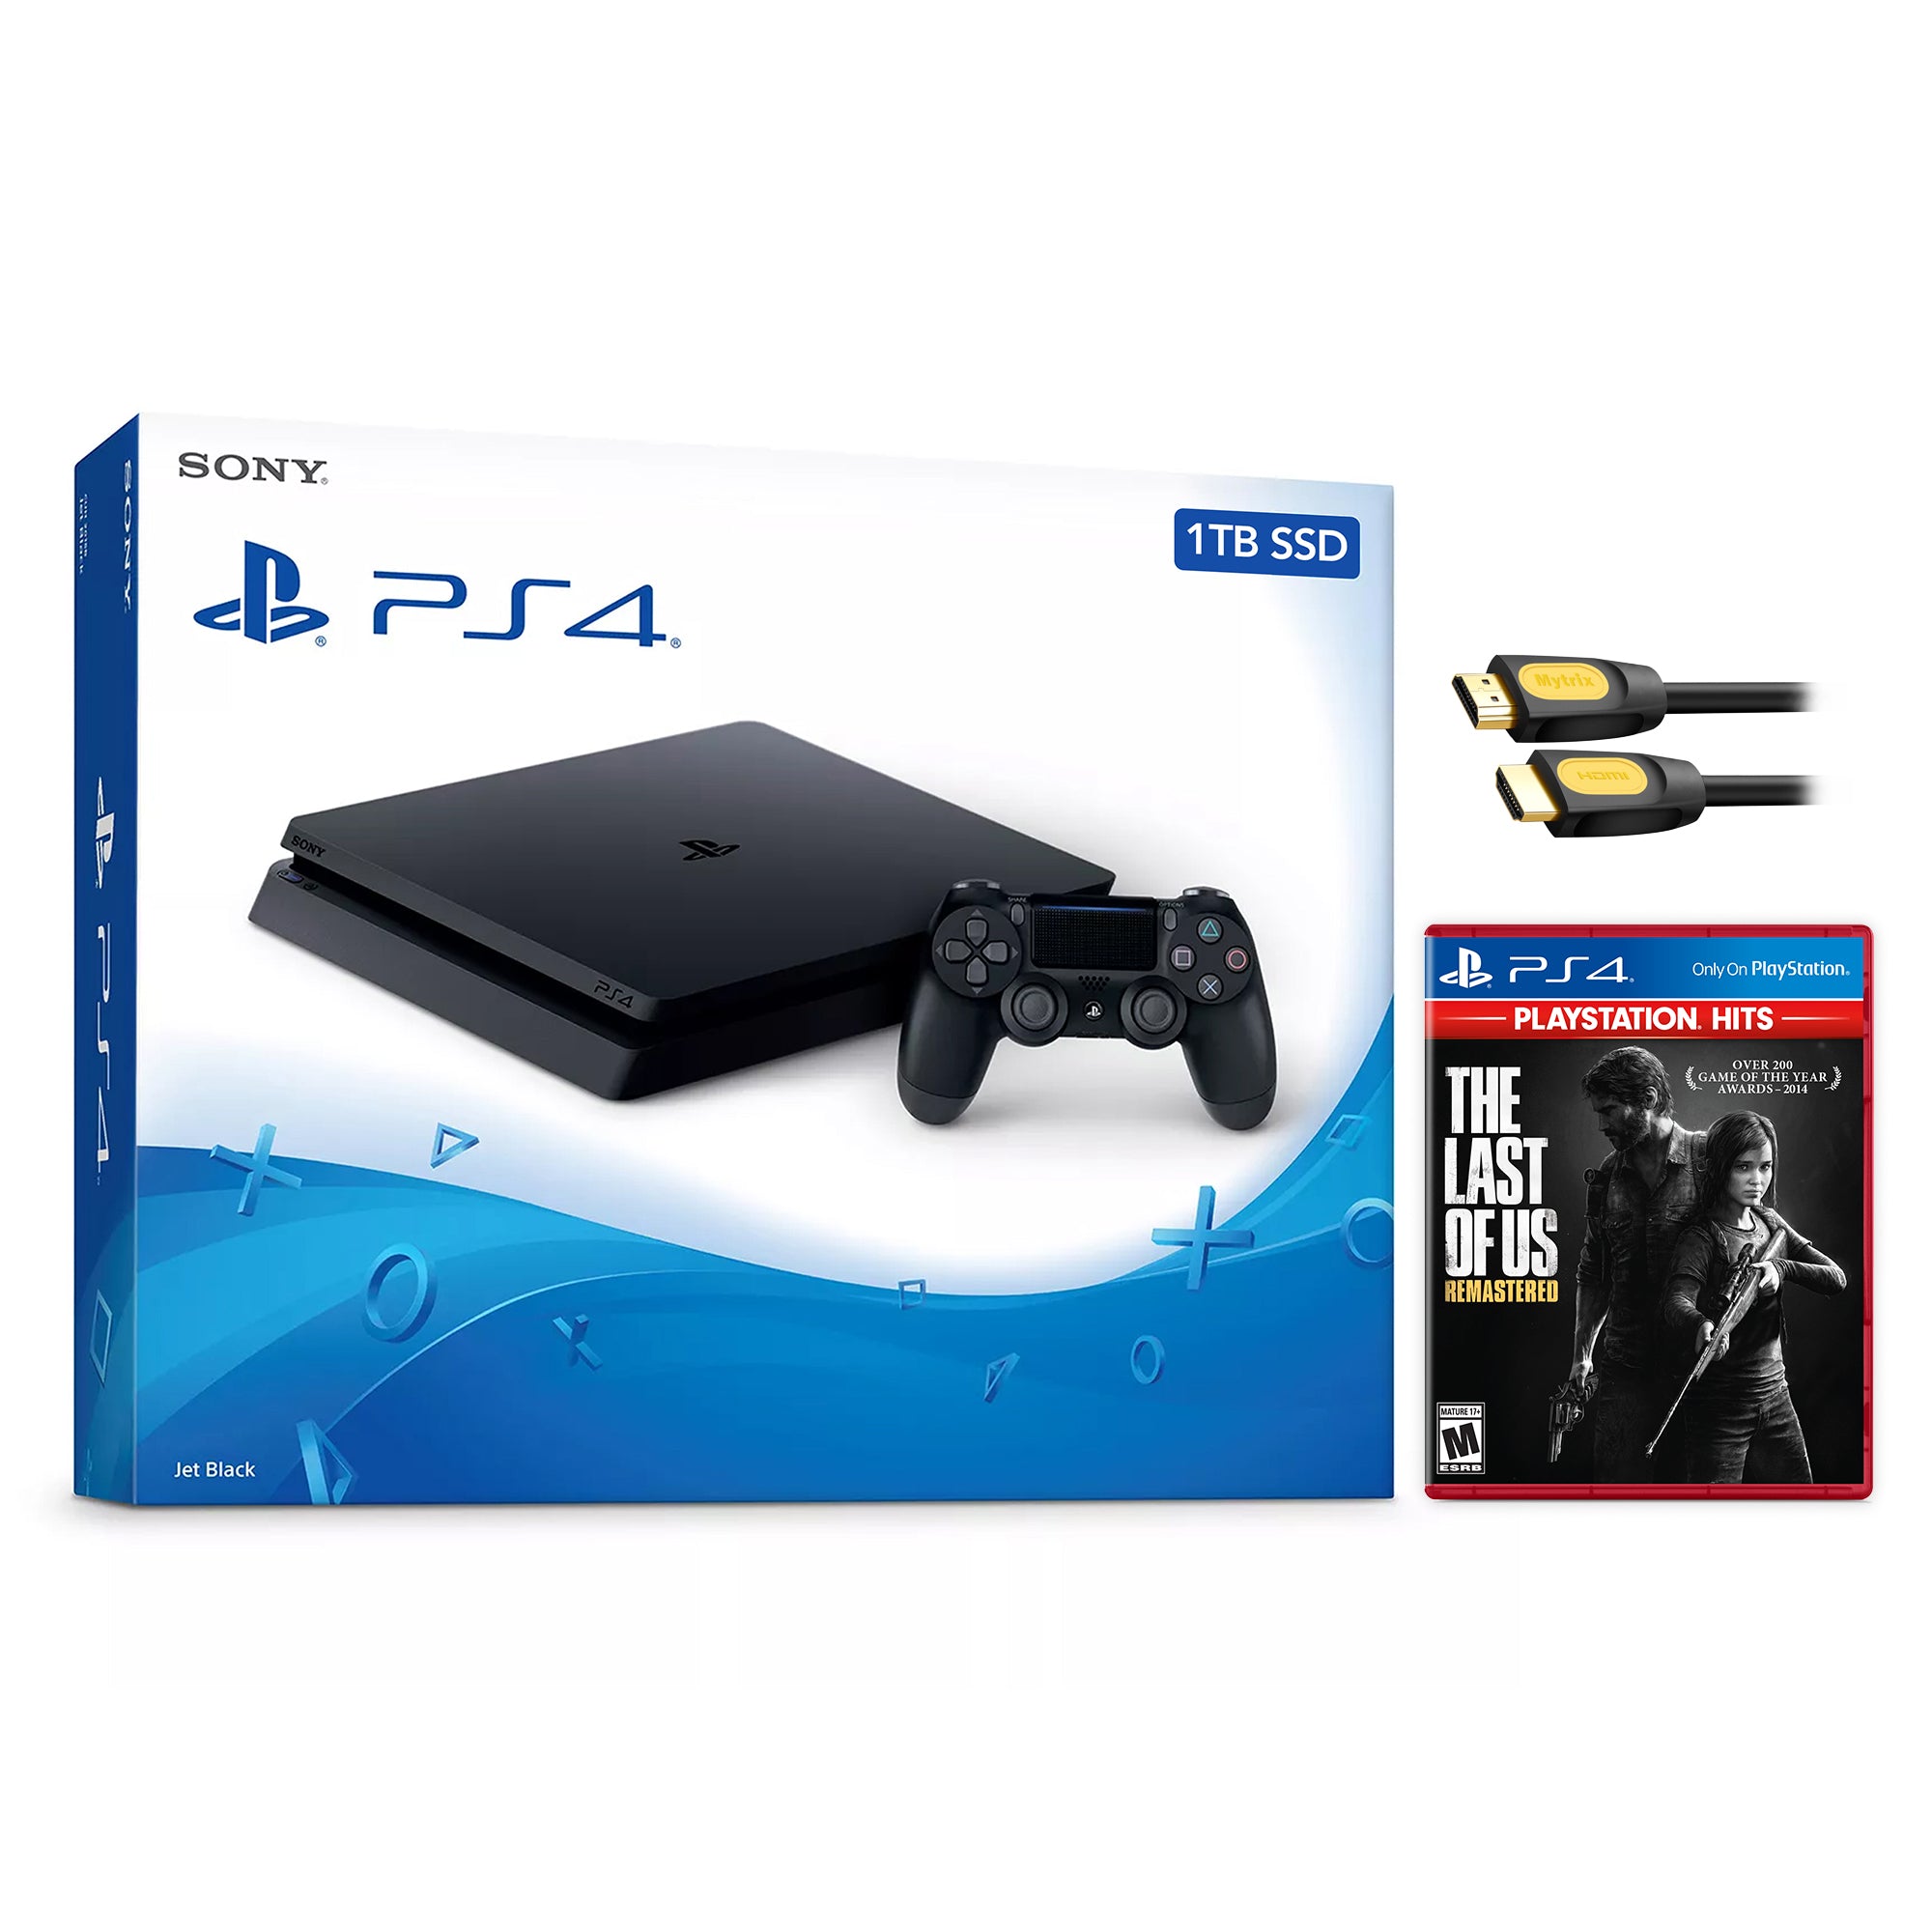 Sony PlayStation 4 Slim Call of Duty Modern Warfare II Bundle Upgrade 1TB SSD PS4 Gaming Console, Jet Black, with Mytrix High Speed HDMI - Internal Fast Solid State Drive Enhanced PS4 Console